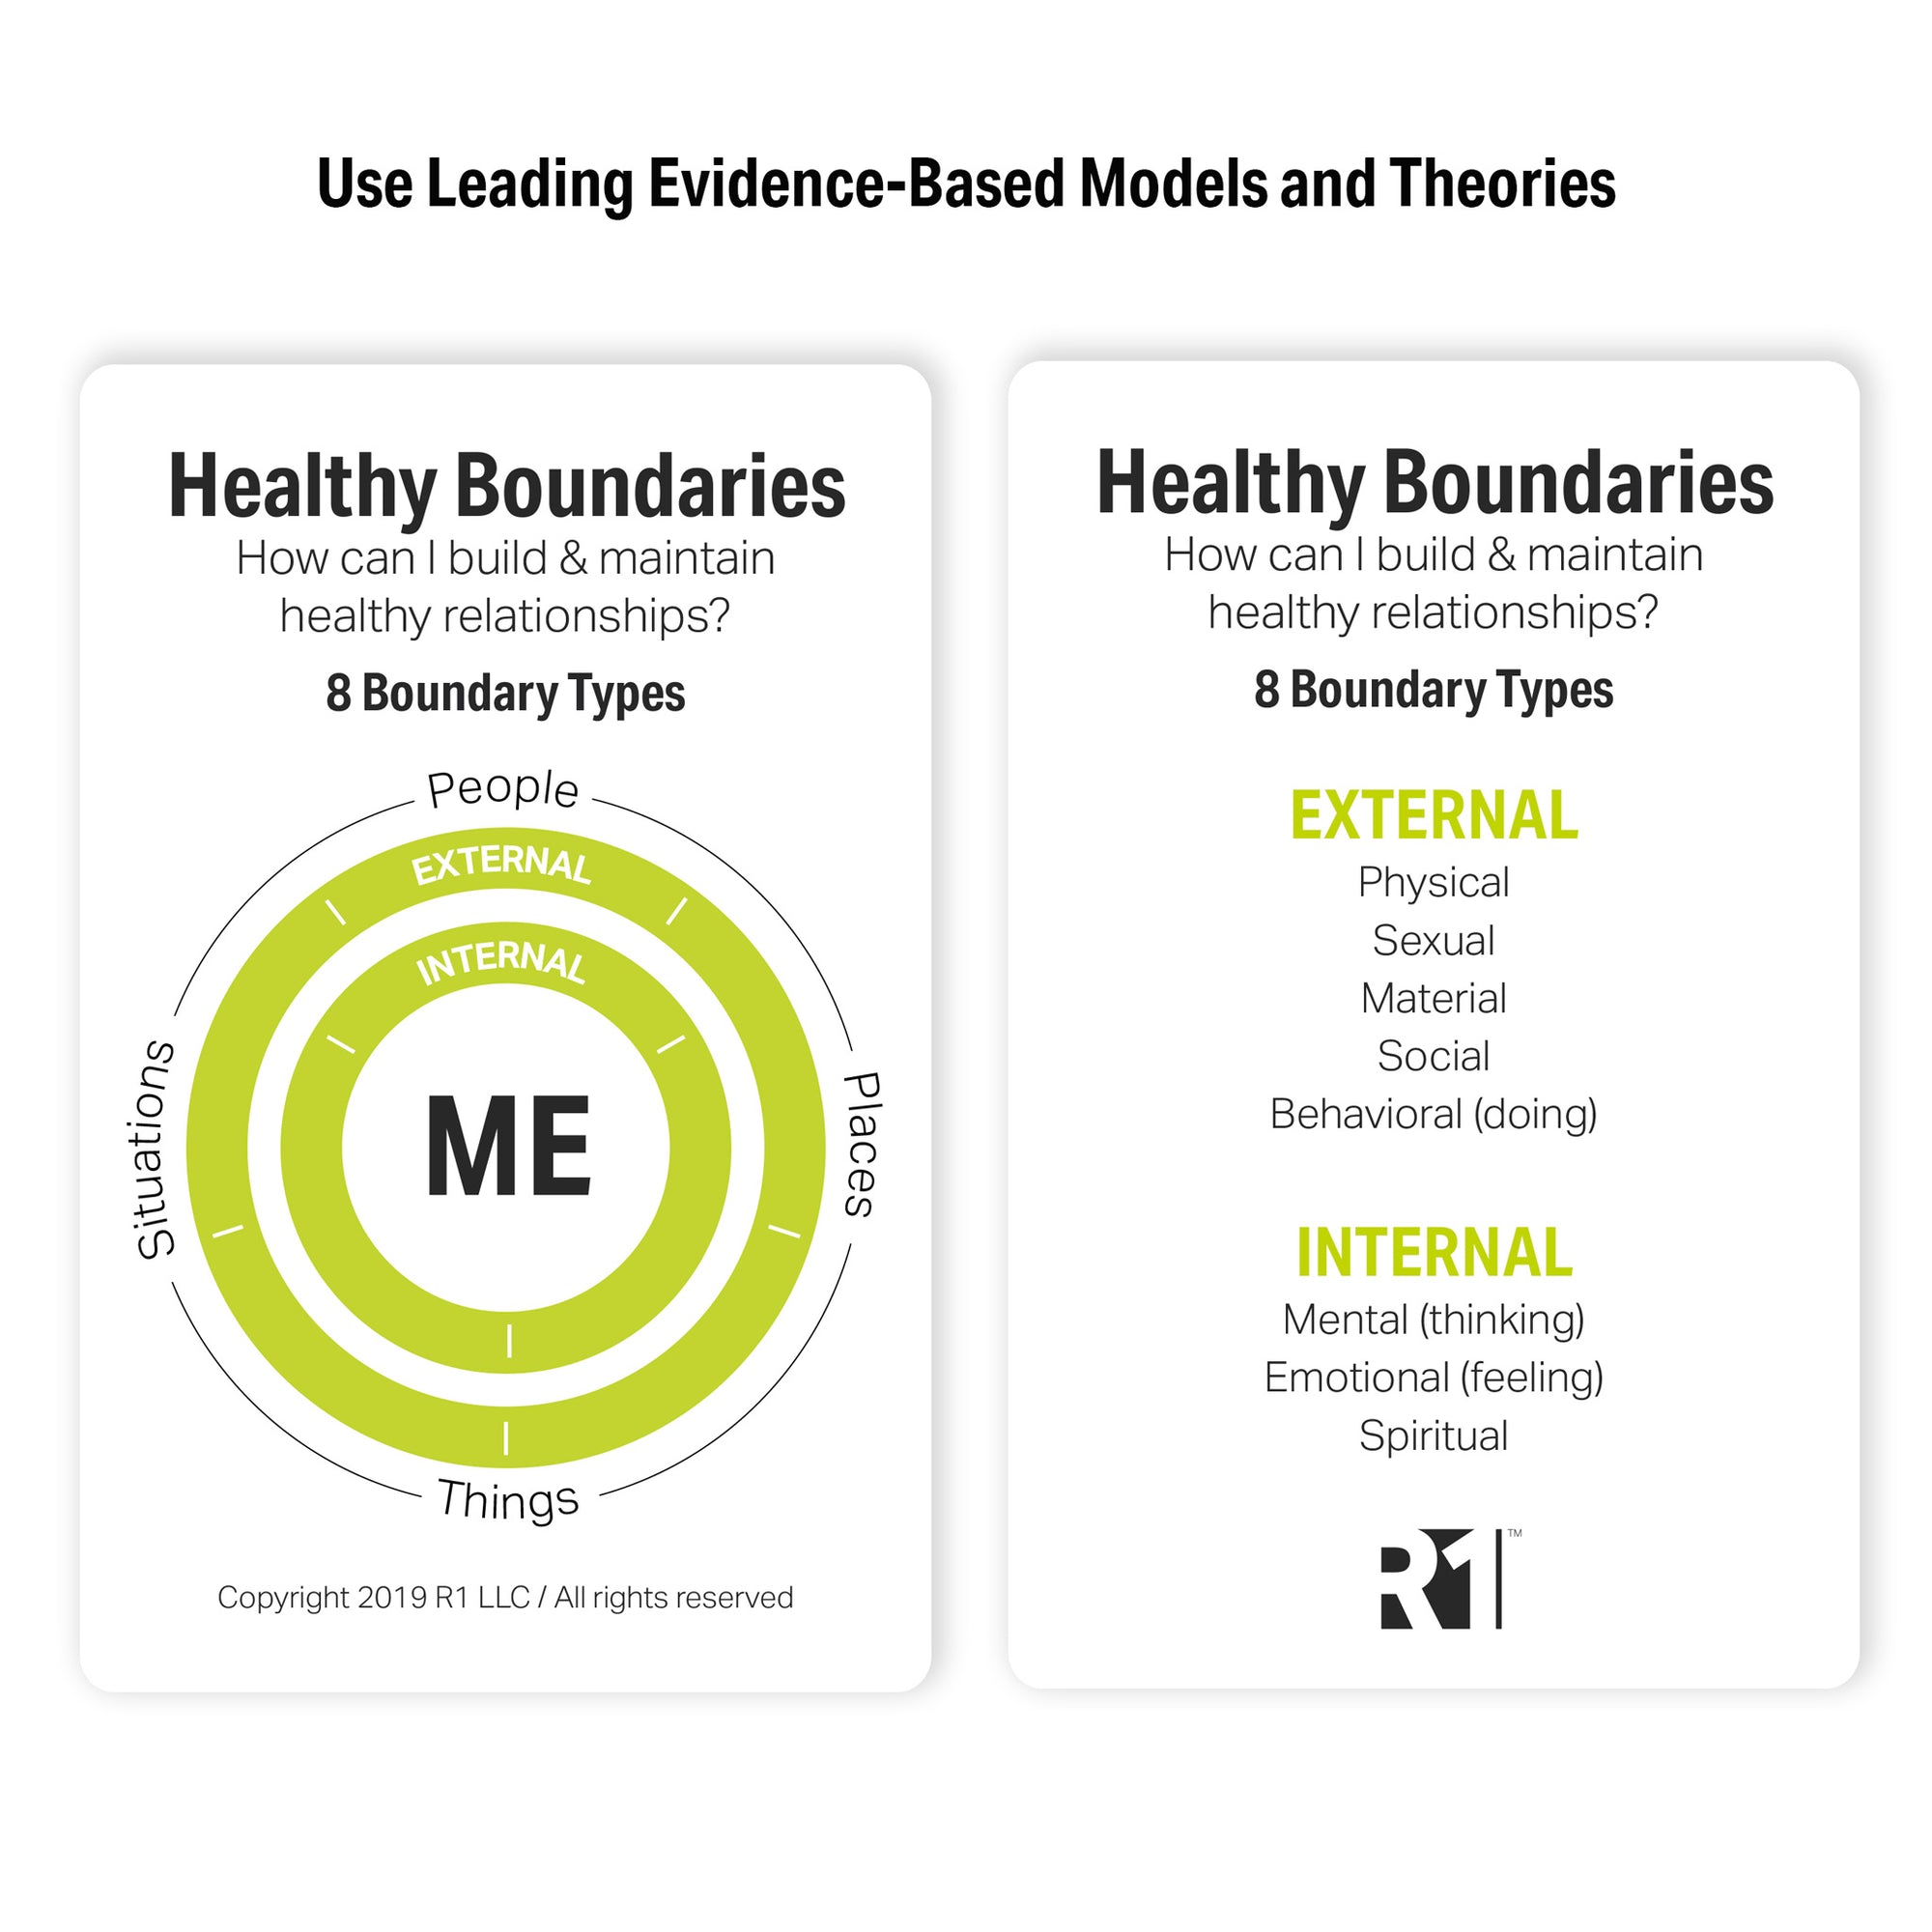 Healthy Boundaries Discovery Cards Deck